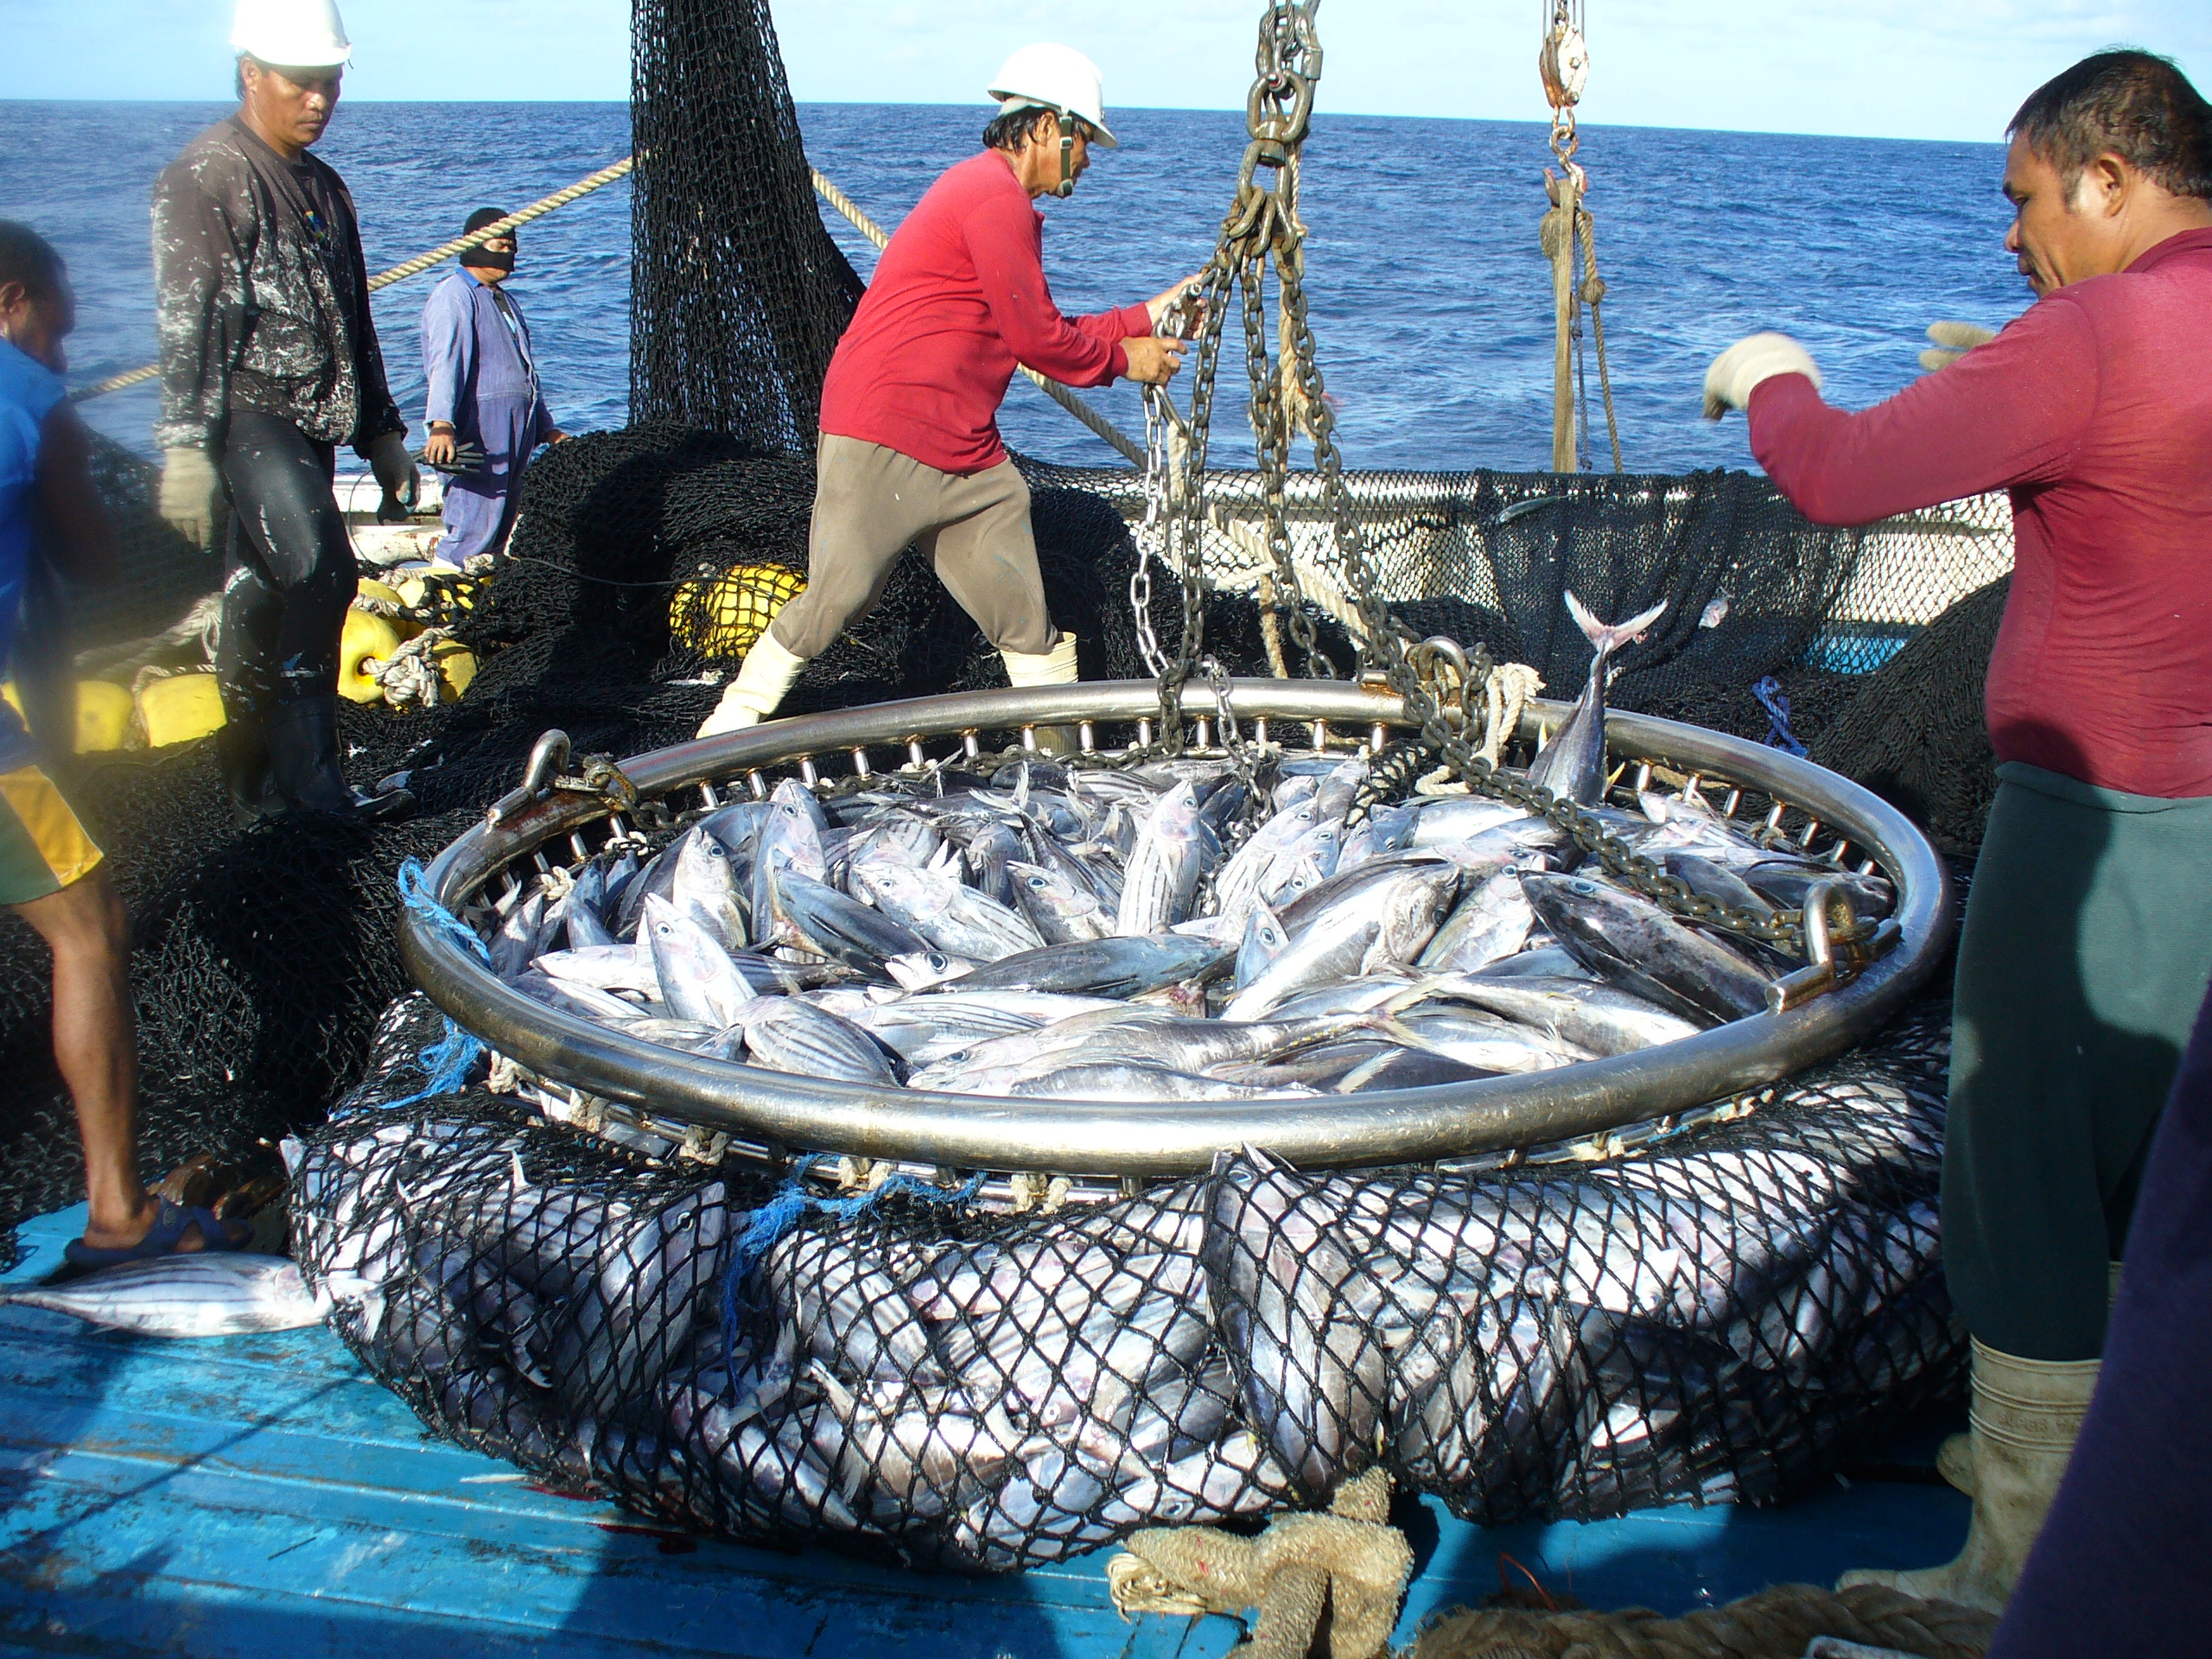 Pacific tuna fisheries sustainable but need to consider threats, especially from climate change